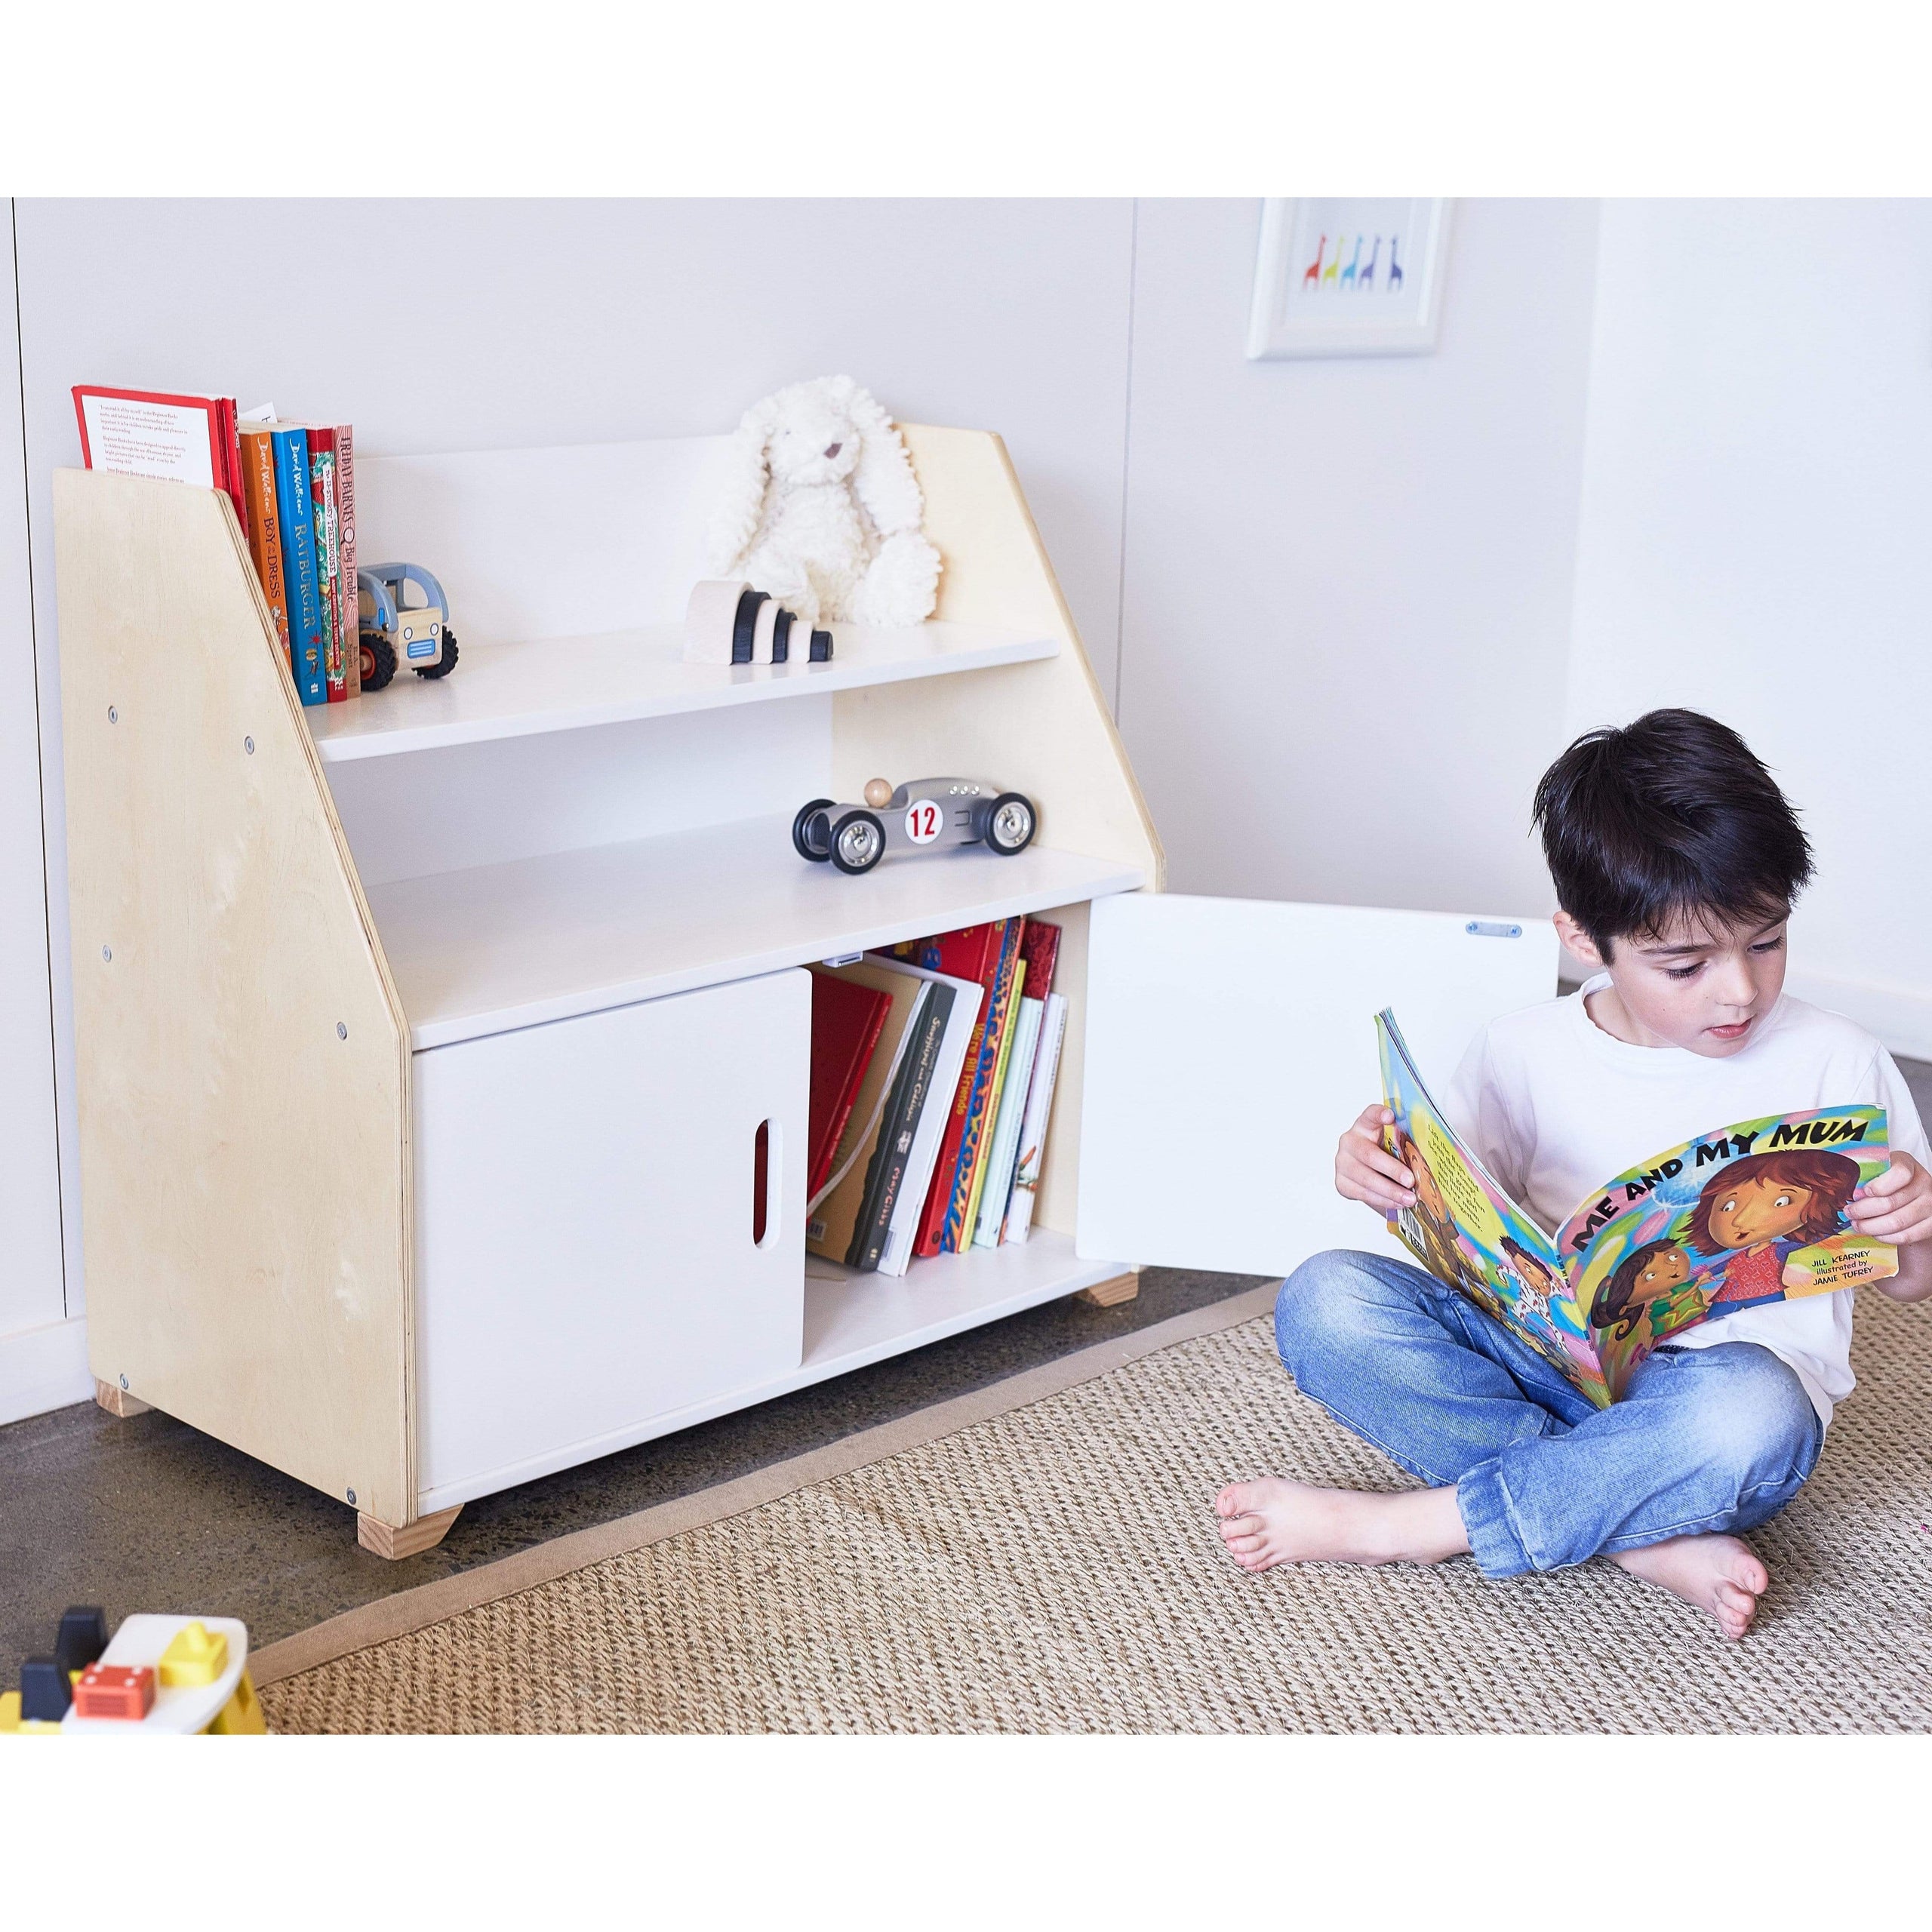 Kids Bedroom Storage | Back to School Means a Fresh New Start